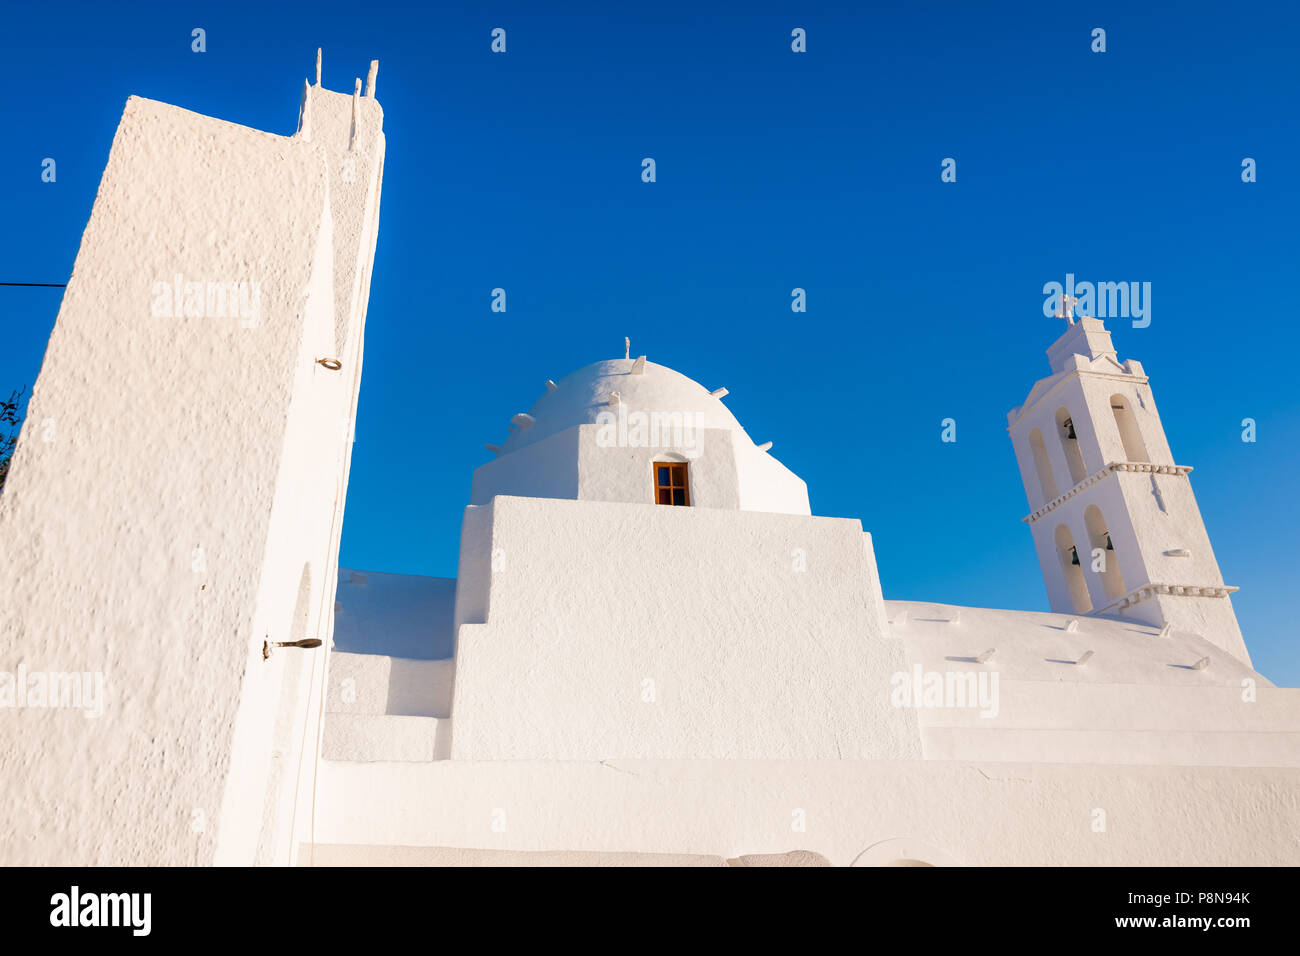 The famous old church of Agia Irini, at the entrance of Yalos, the port of Ios island, Cyclades, Greece. Stock Photo